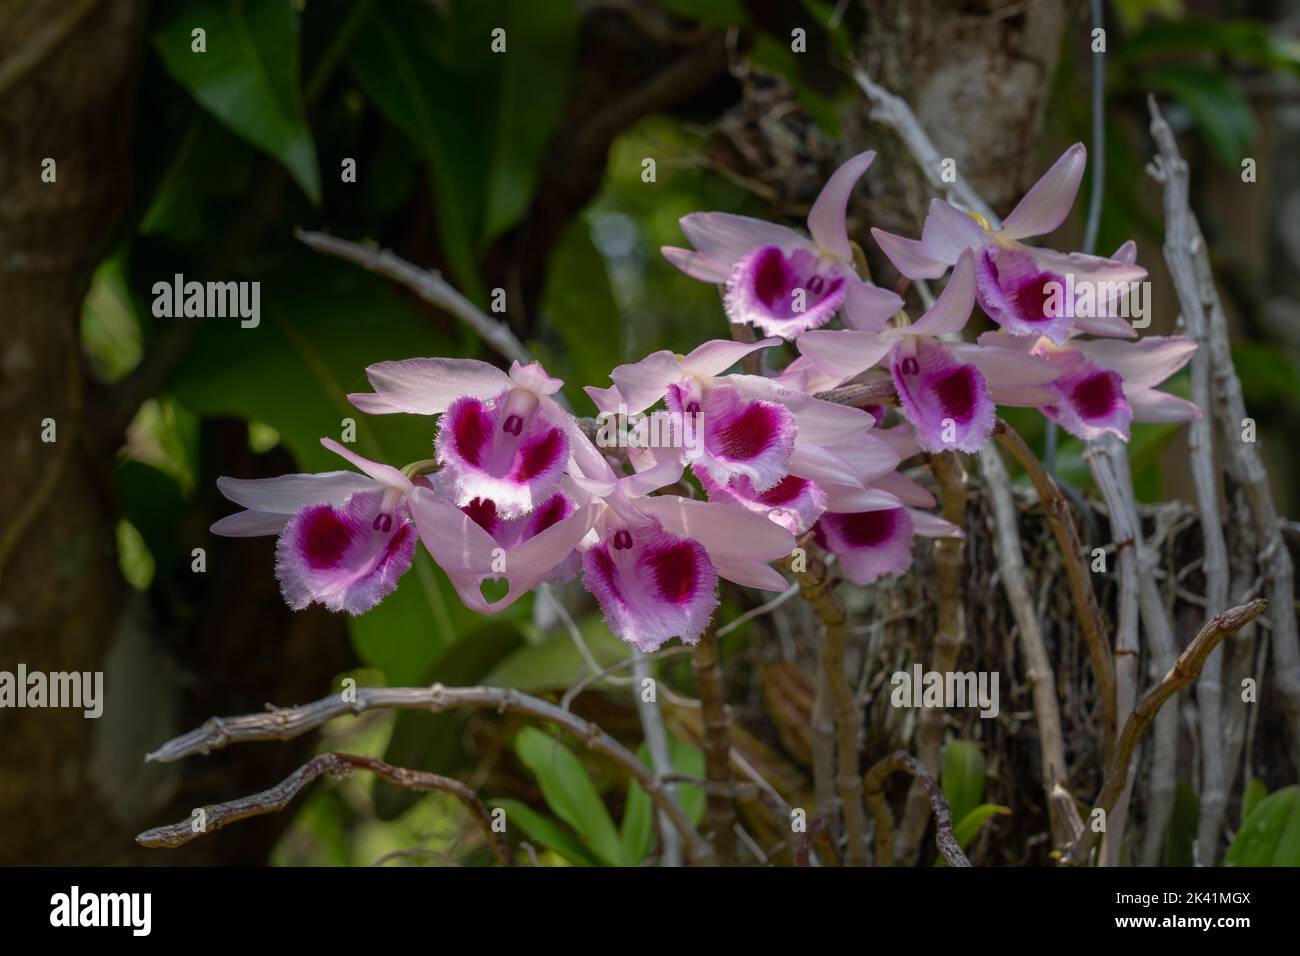 Closeup view of beautiful blooming pink and purple dendrobium anosmum orchid species on natural background Stock Photo